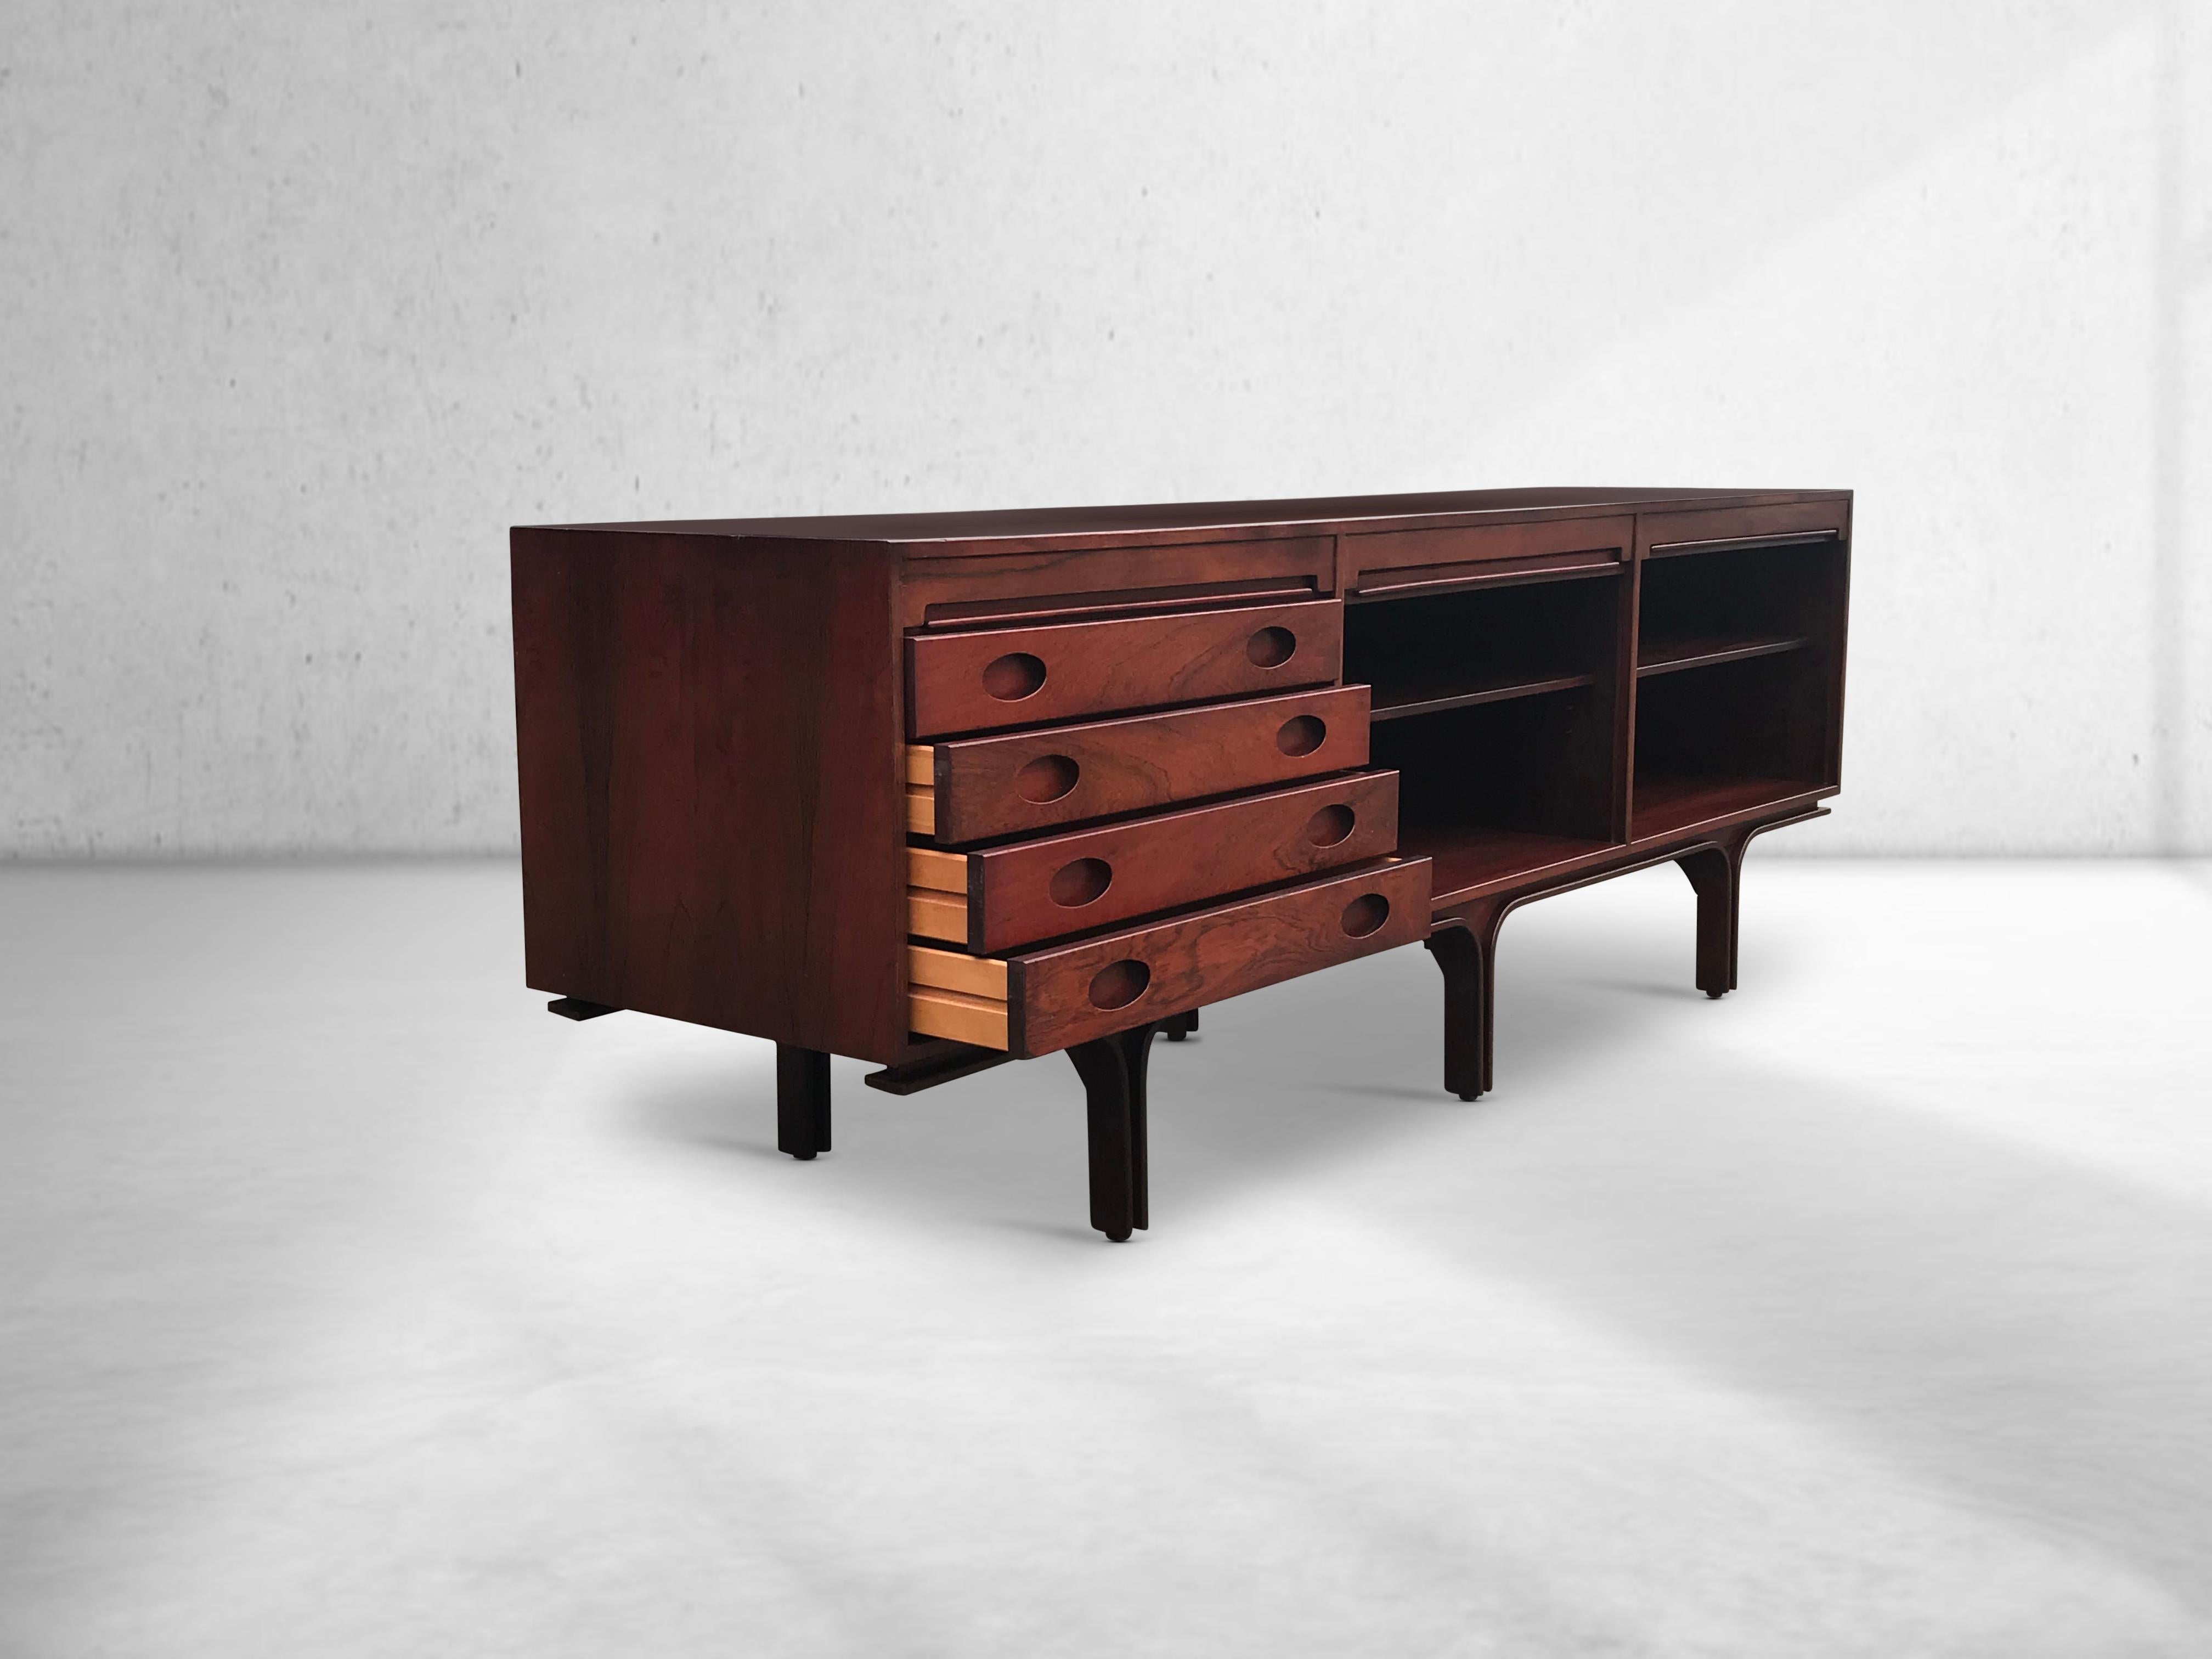 Long Italian sideboard with roll doors. The piece was designed by Gianfranco Frattini for Bernini. Manufactured and produced around 1960s with highest care for detail and true craftsmanship. It features three storage sections, each one hidden behind